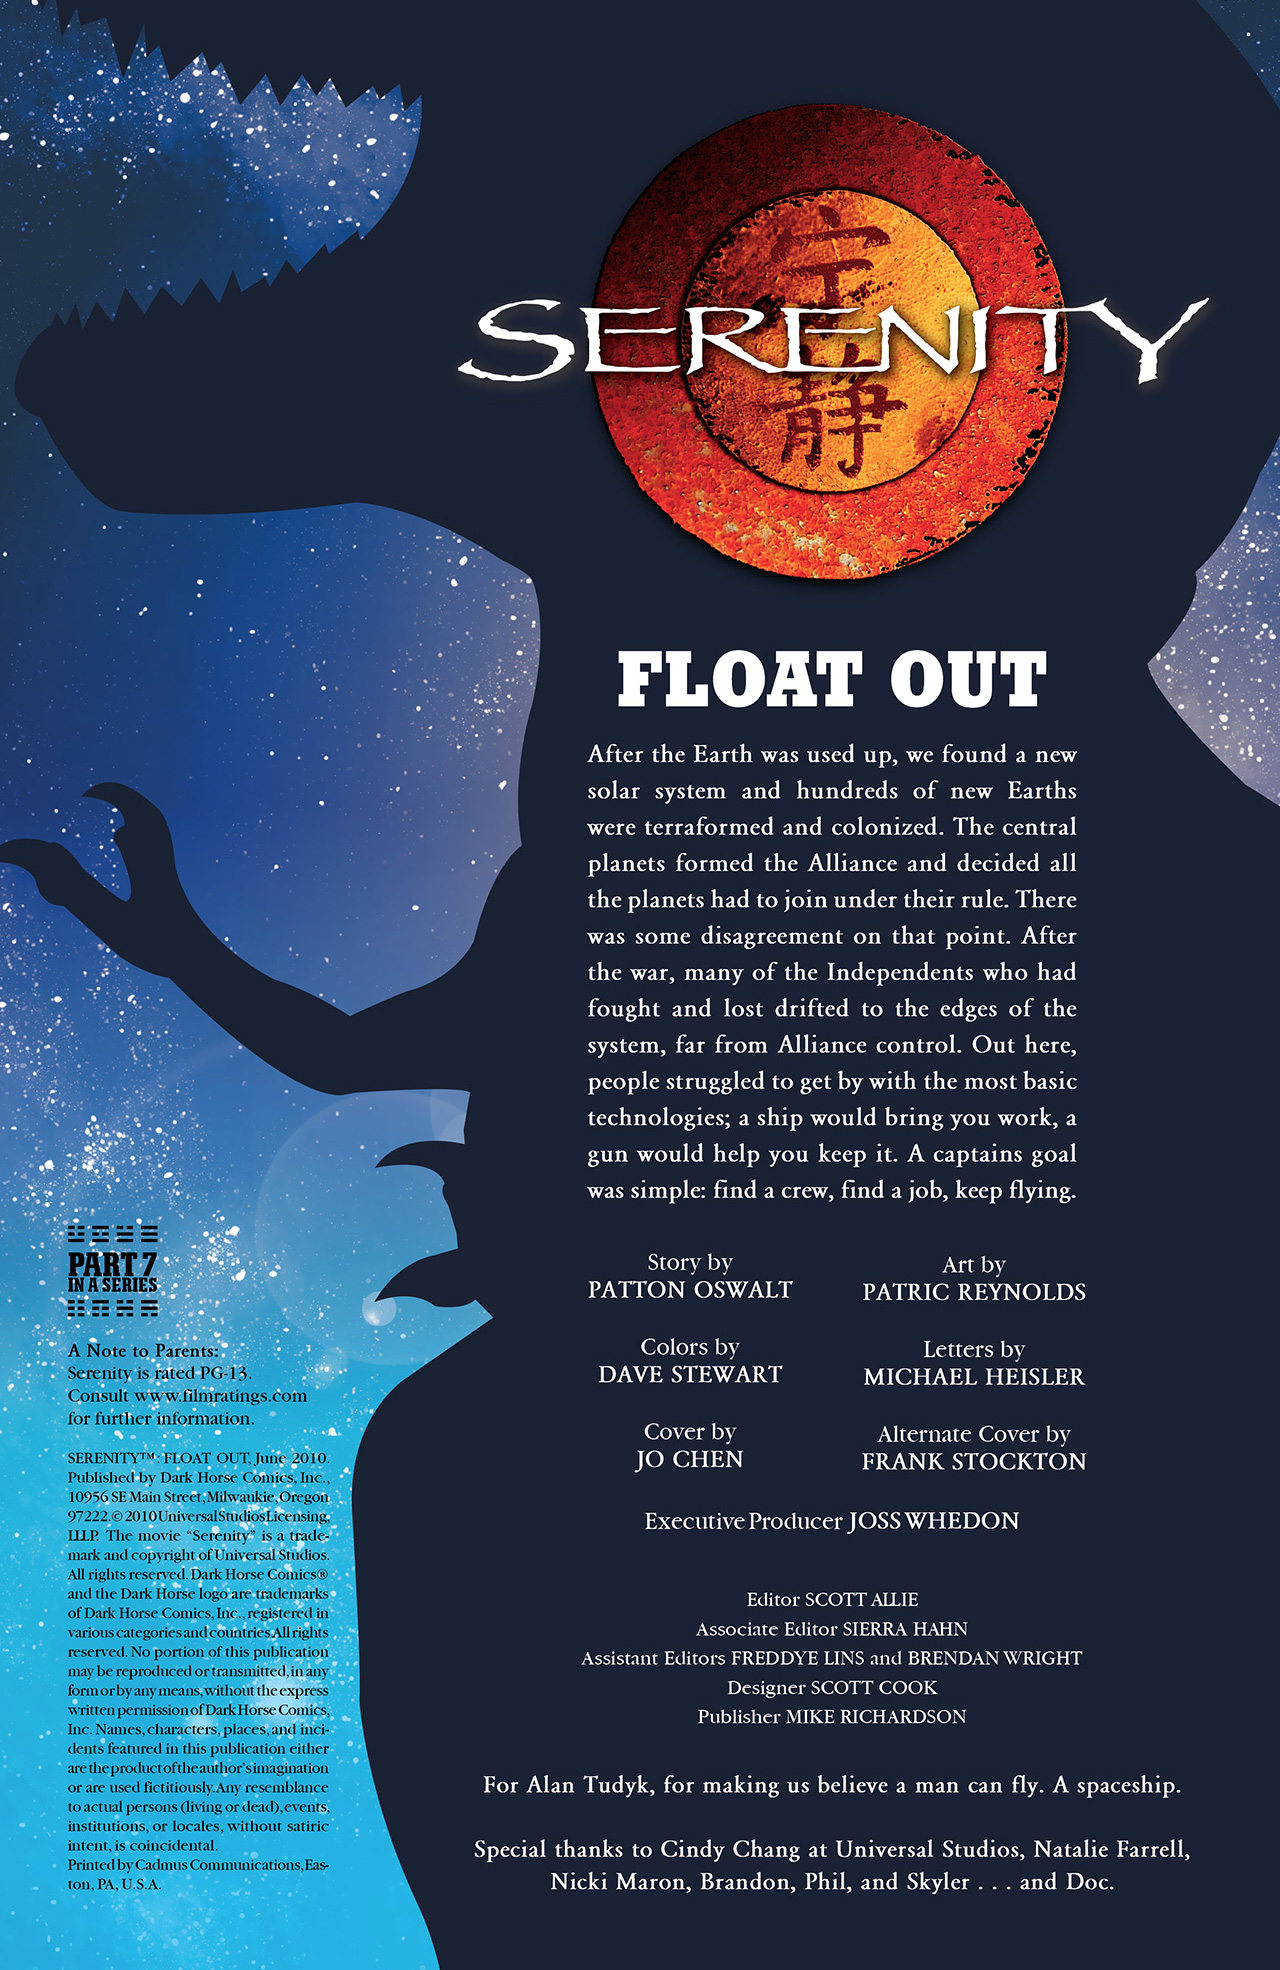 Read online Serenity: Float Out comic -  Issue # Full - 3